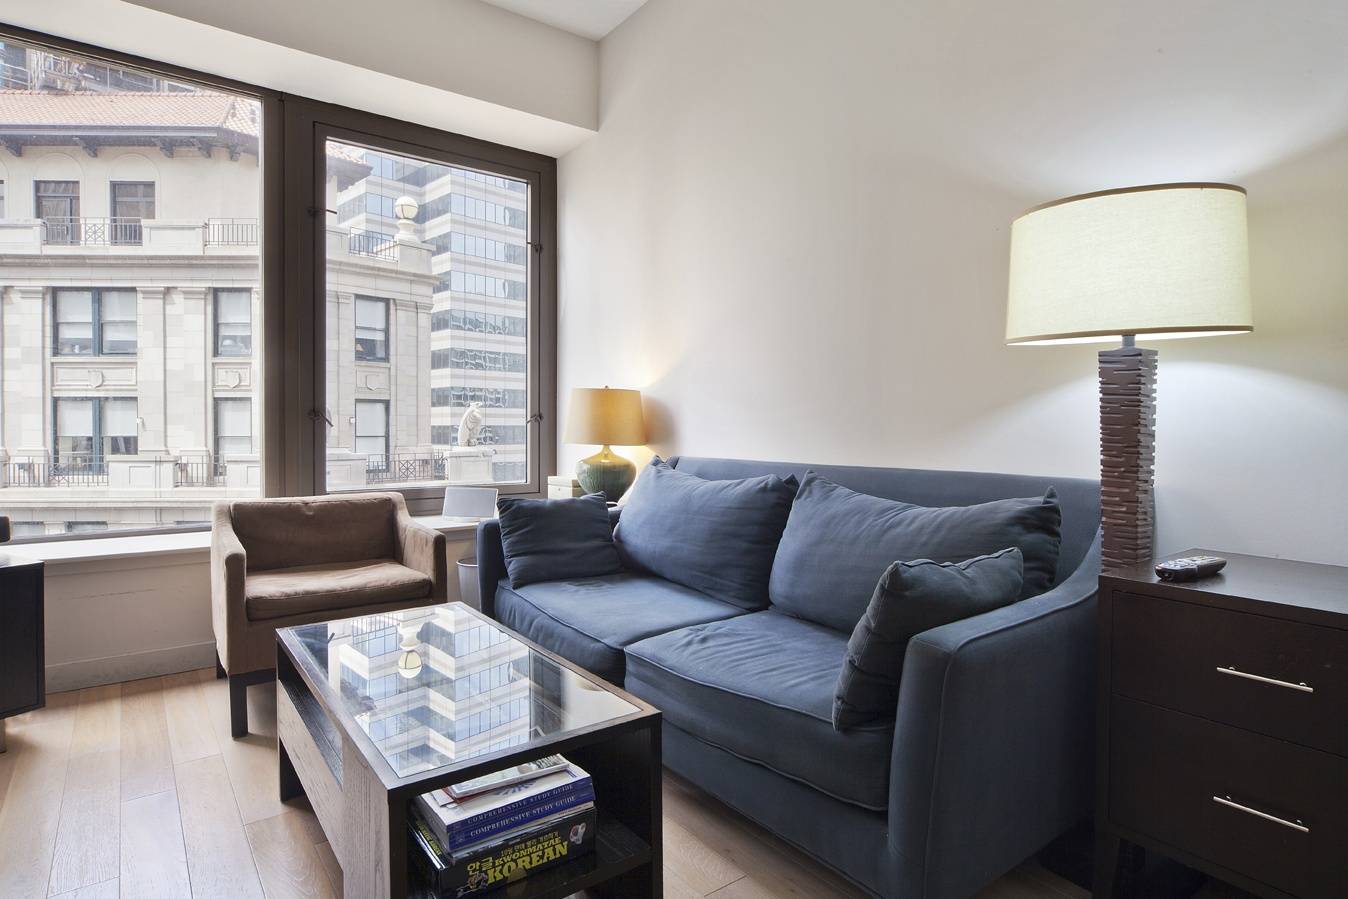 Two Bedroom Apartment for Rent -Located in the Financial District - Wall Street Area - Many Apartments Available in FIDI - Many NO FEE!